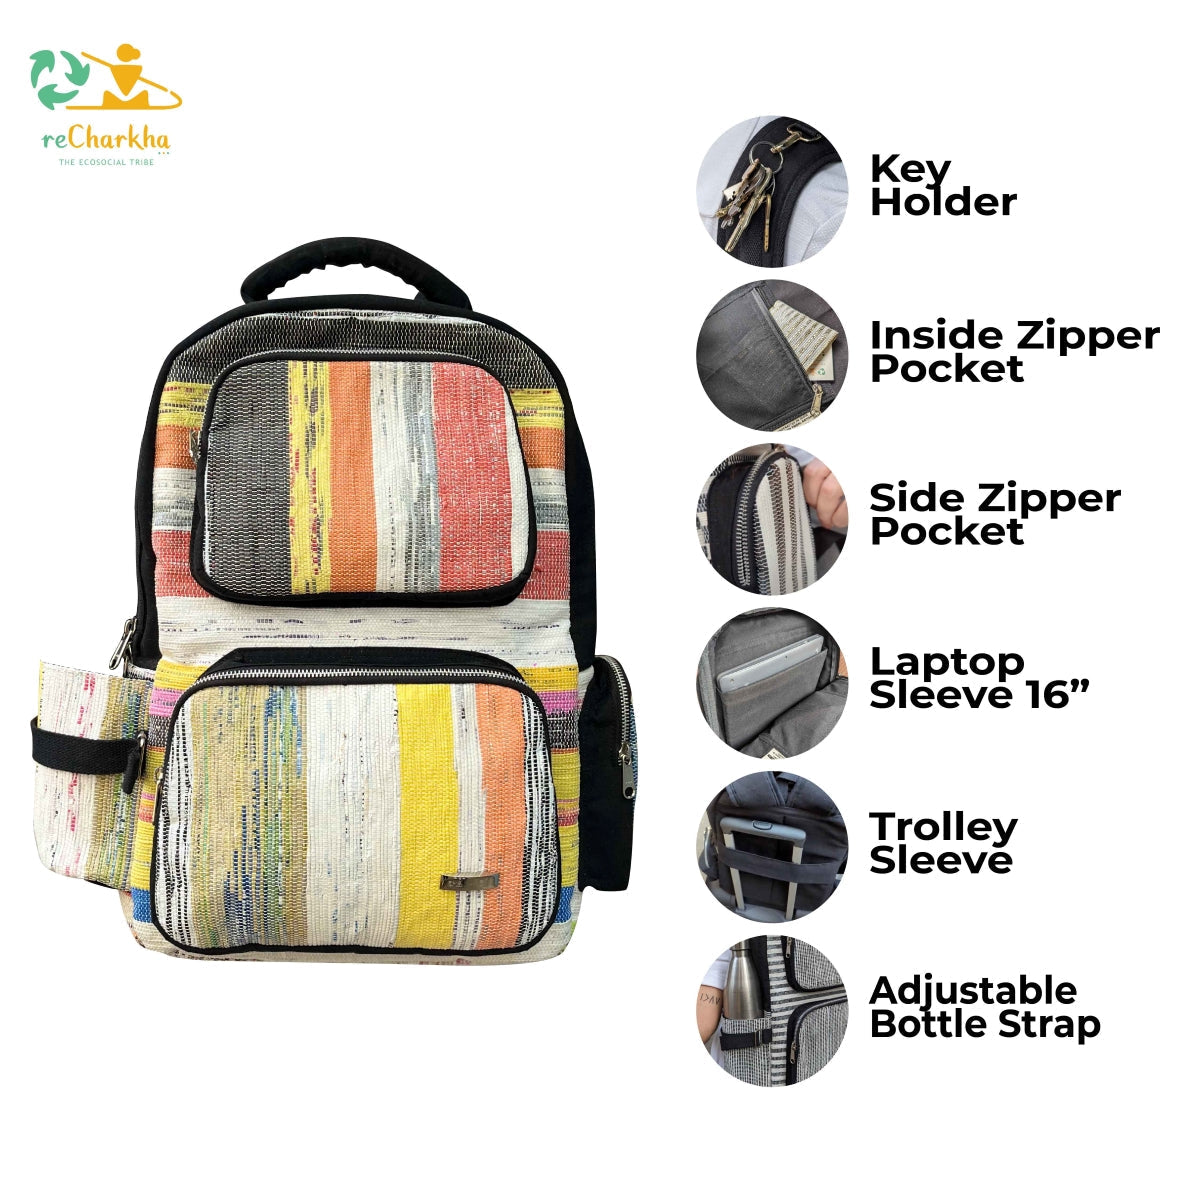 recharkha upcycled handwoven commuter backpack handmade in india from waste plastic bags and wrappers 